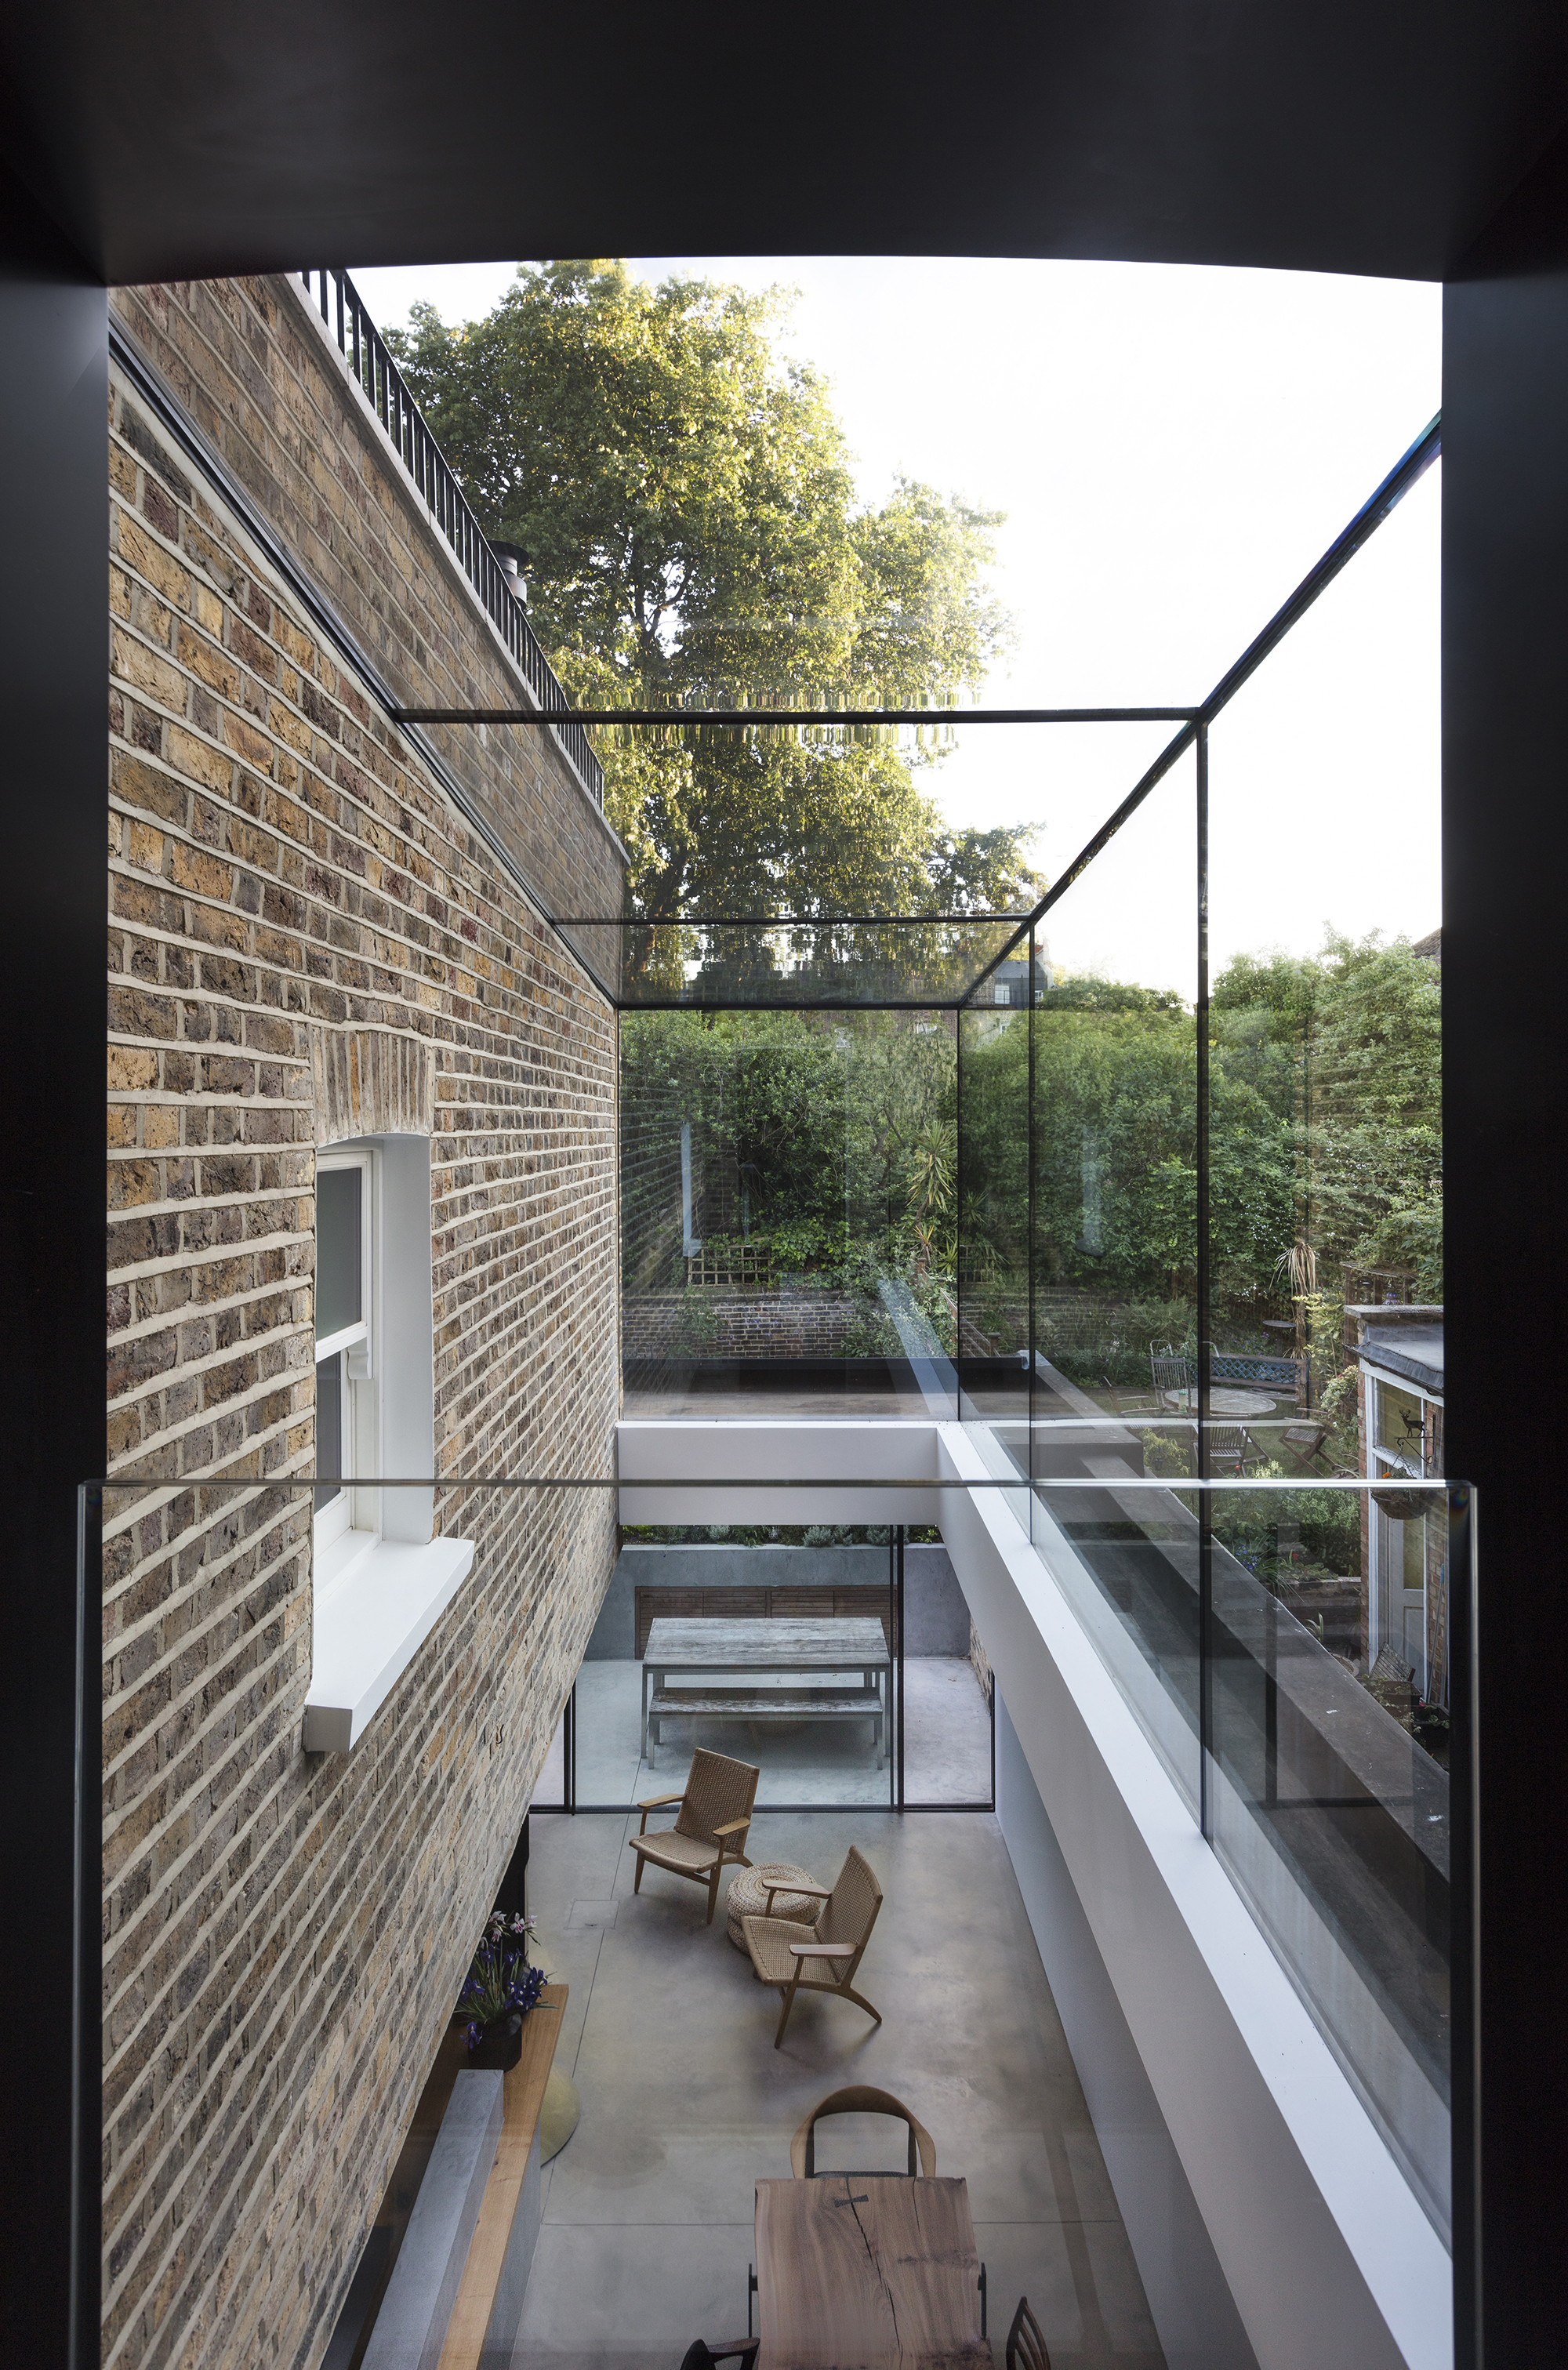 </p> <p>Find your ideal home design pro on designfor-me.com - get matched and see who's interested in your home project. Click image to see more inspiration from our design pros</p> <p>Design by Catherine, architect from Hackney, London</p> <p>#architecture #homedesign #modernhomes #homeinspiration #minimalistarchitecture #minimalistdecor #minimalistdesign #miminalism #sideextensions #sidereturn #sideextensionideas #glazing #architecturalglazing #naturallight #skylights #rooflights #doubleheightspace</p> <p>